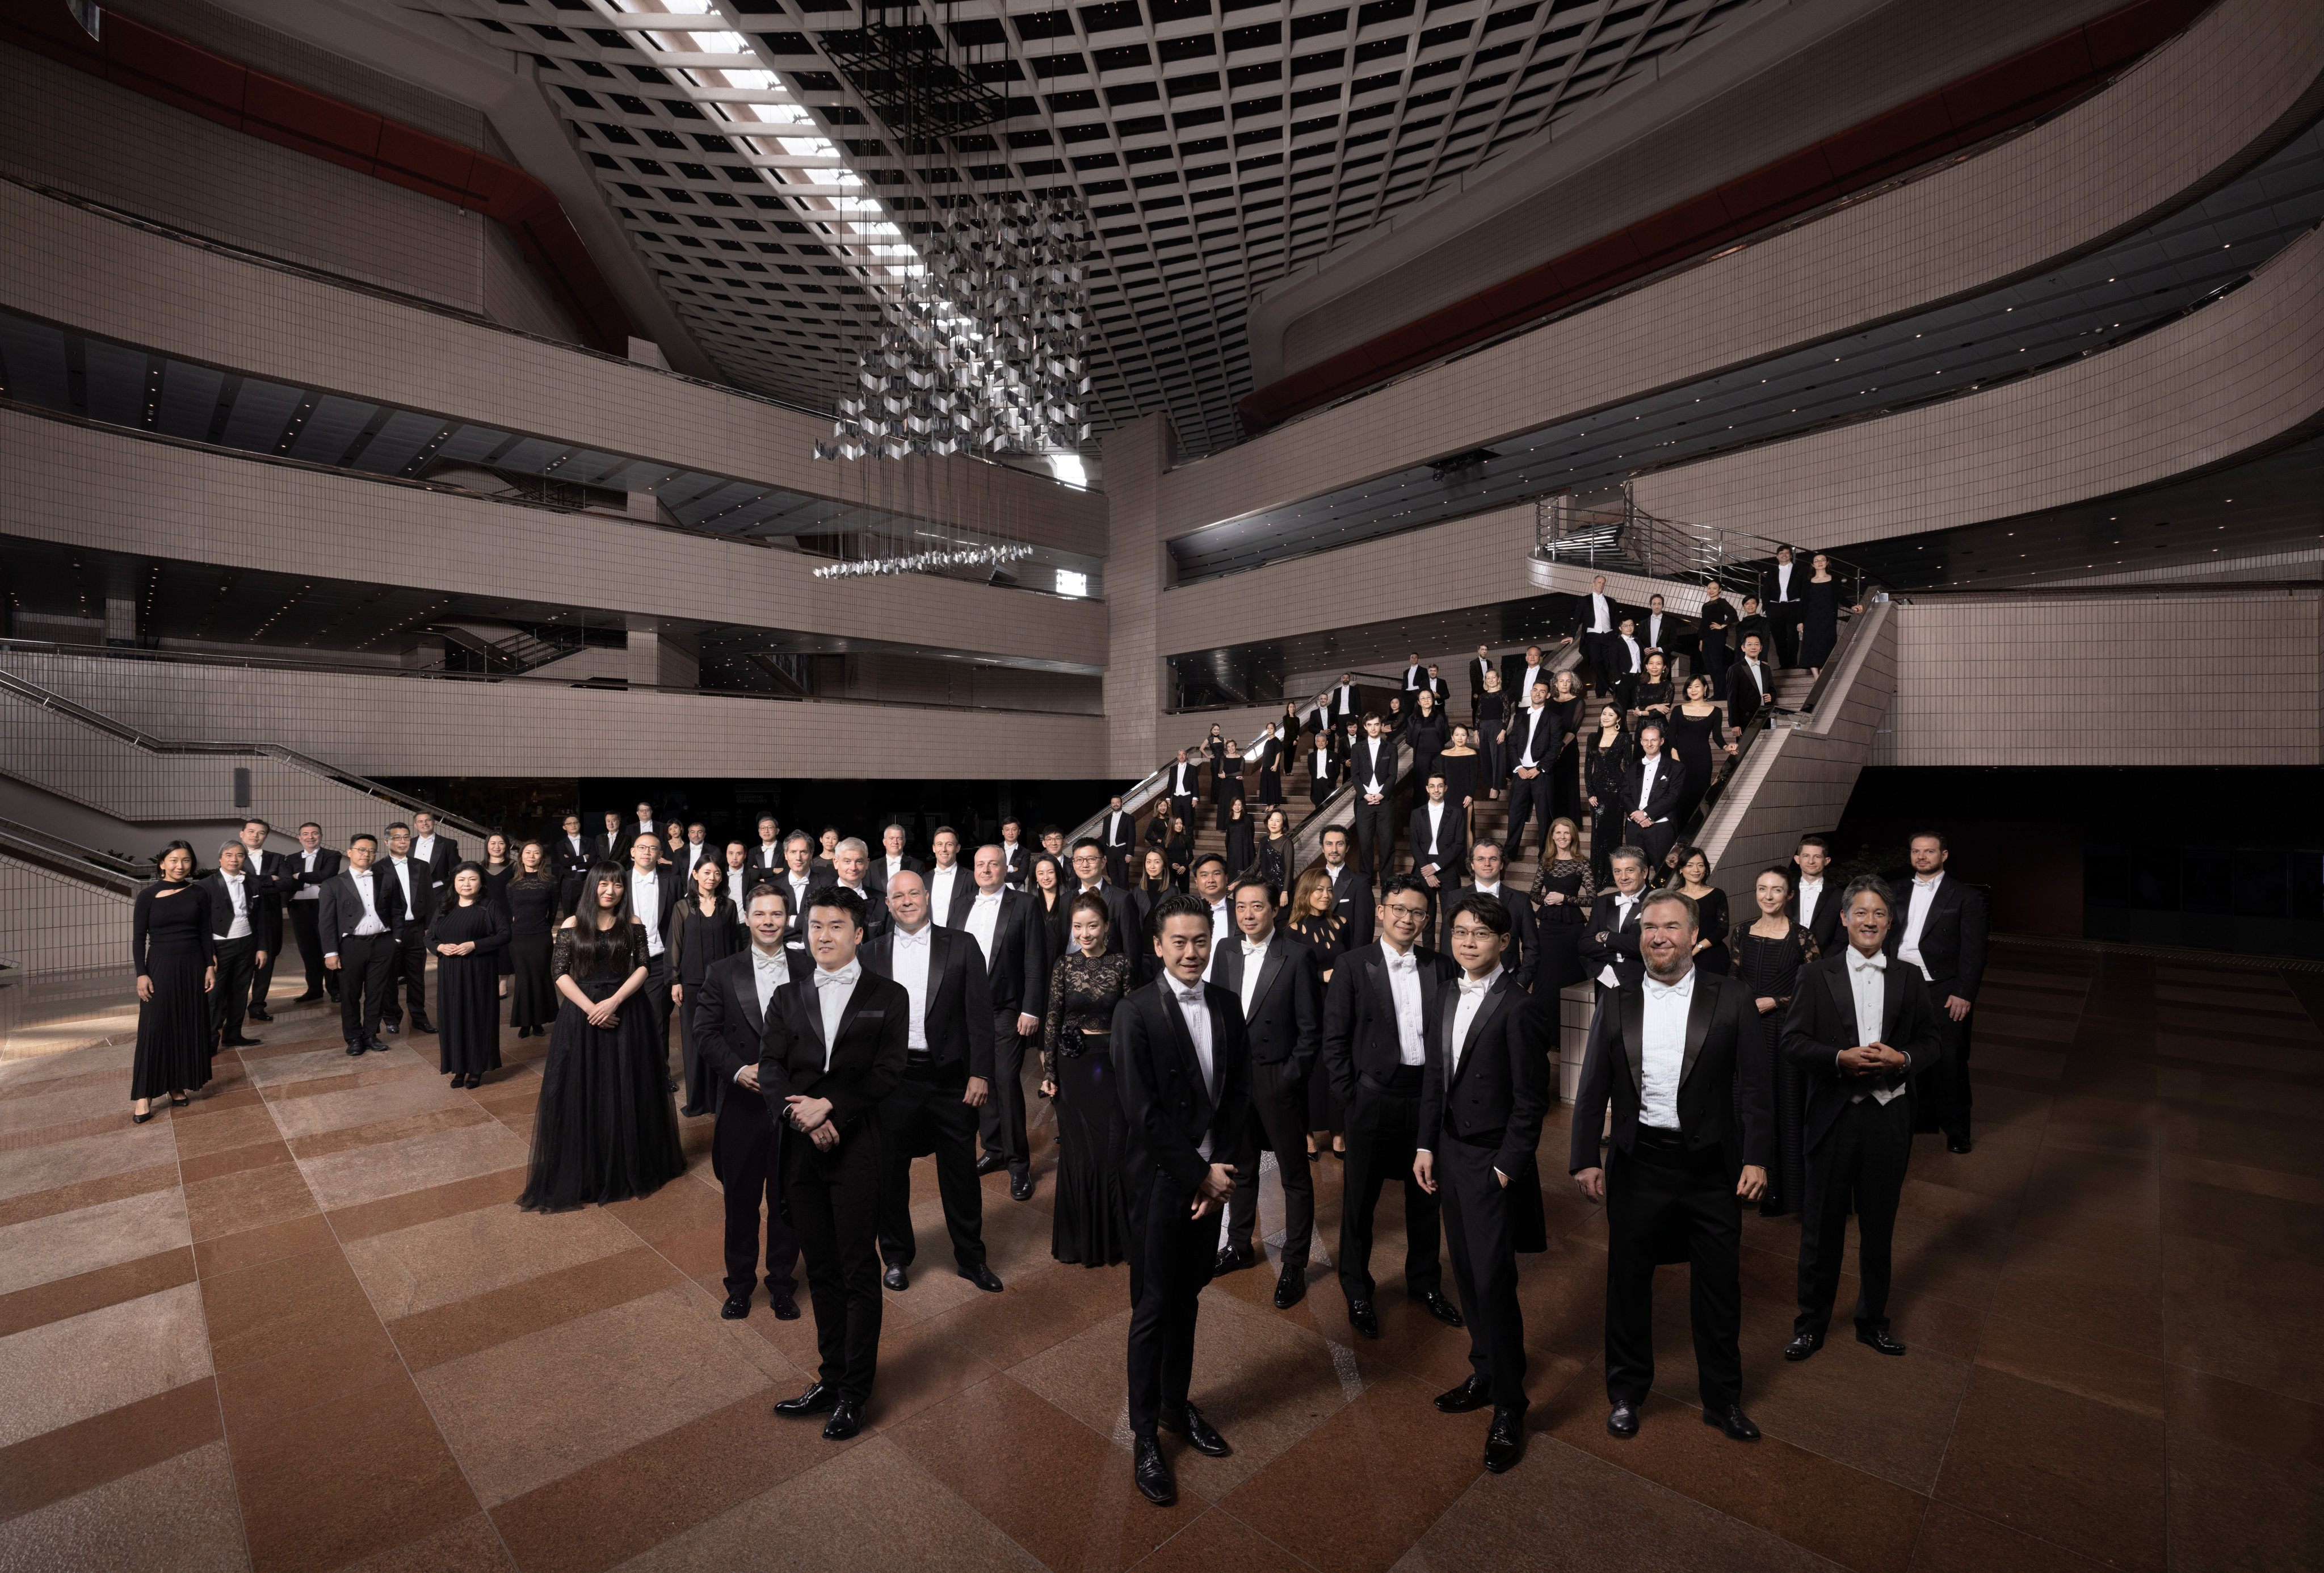 The Hong Kong Philharmonic Orchestra will commemorate its 50th anniversary by restaging its debut programme from 1974, featuring Beethoven’s Egmont Overture and Tchaikovsky’s Symphony No 5. Photo: Keith Hiro/HK Phil